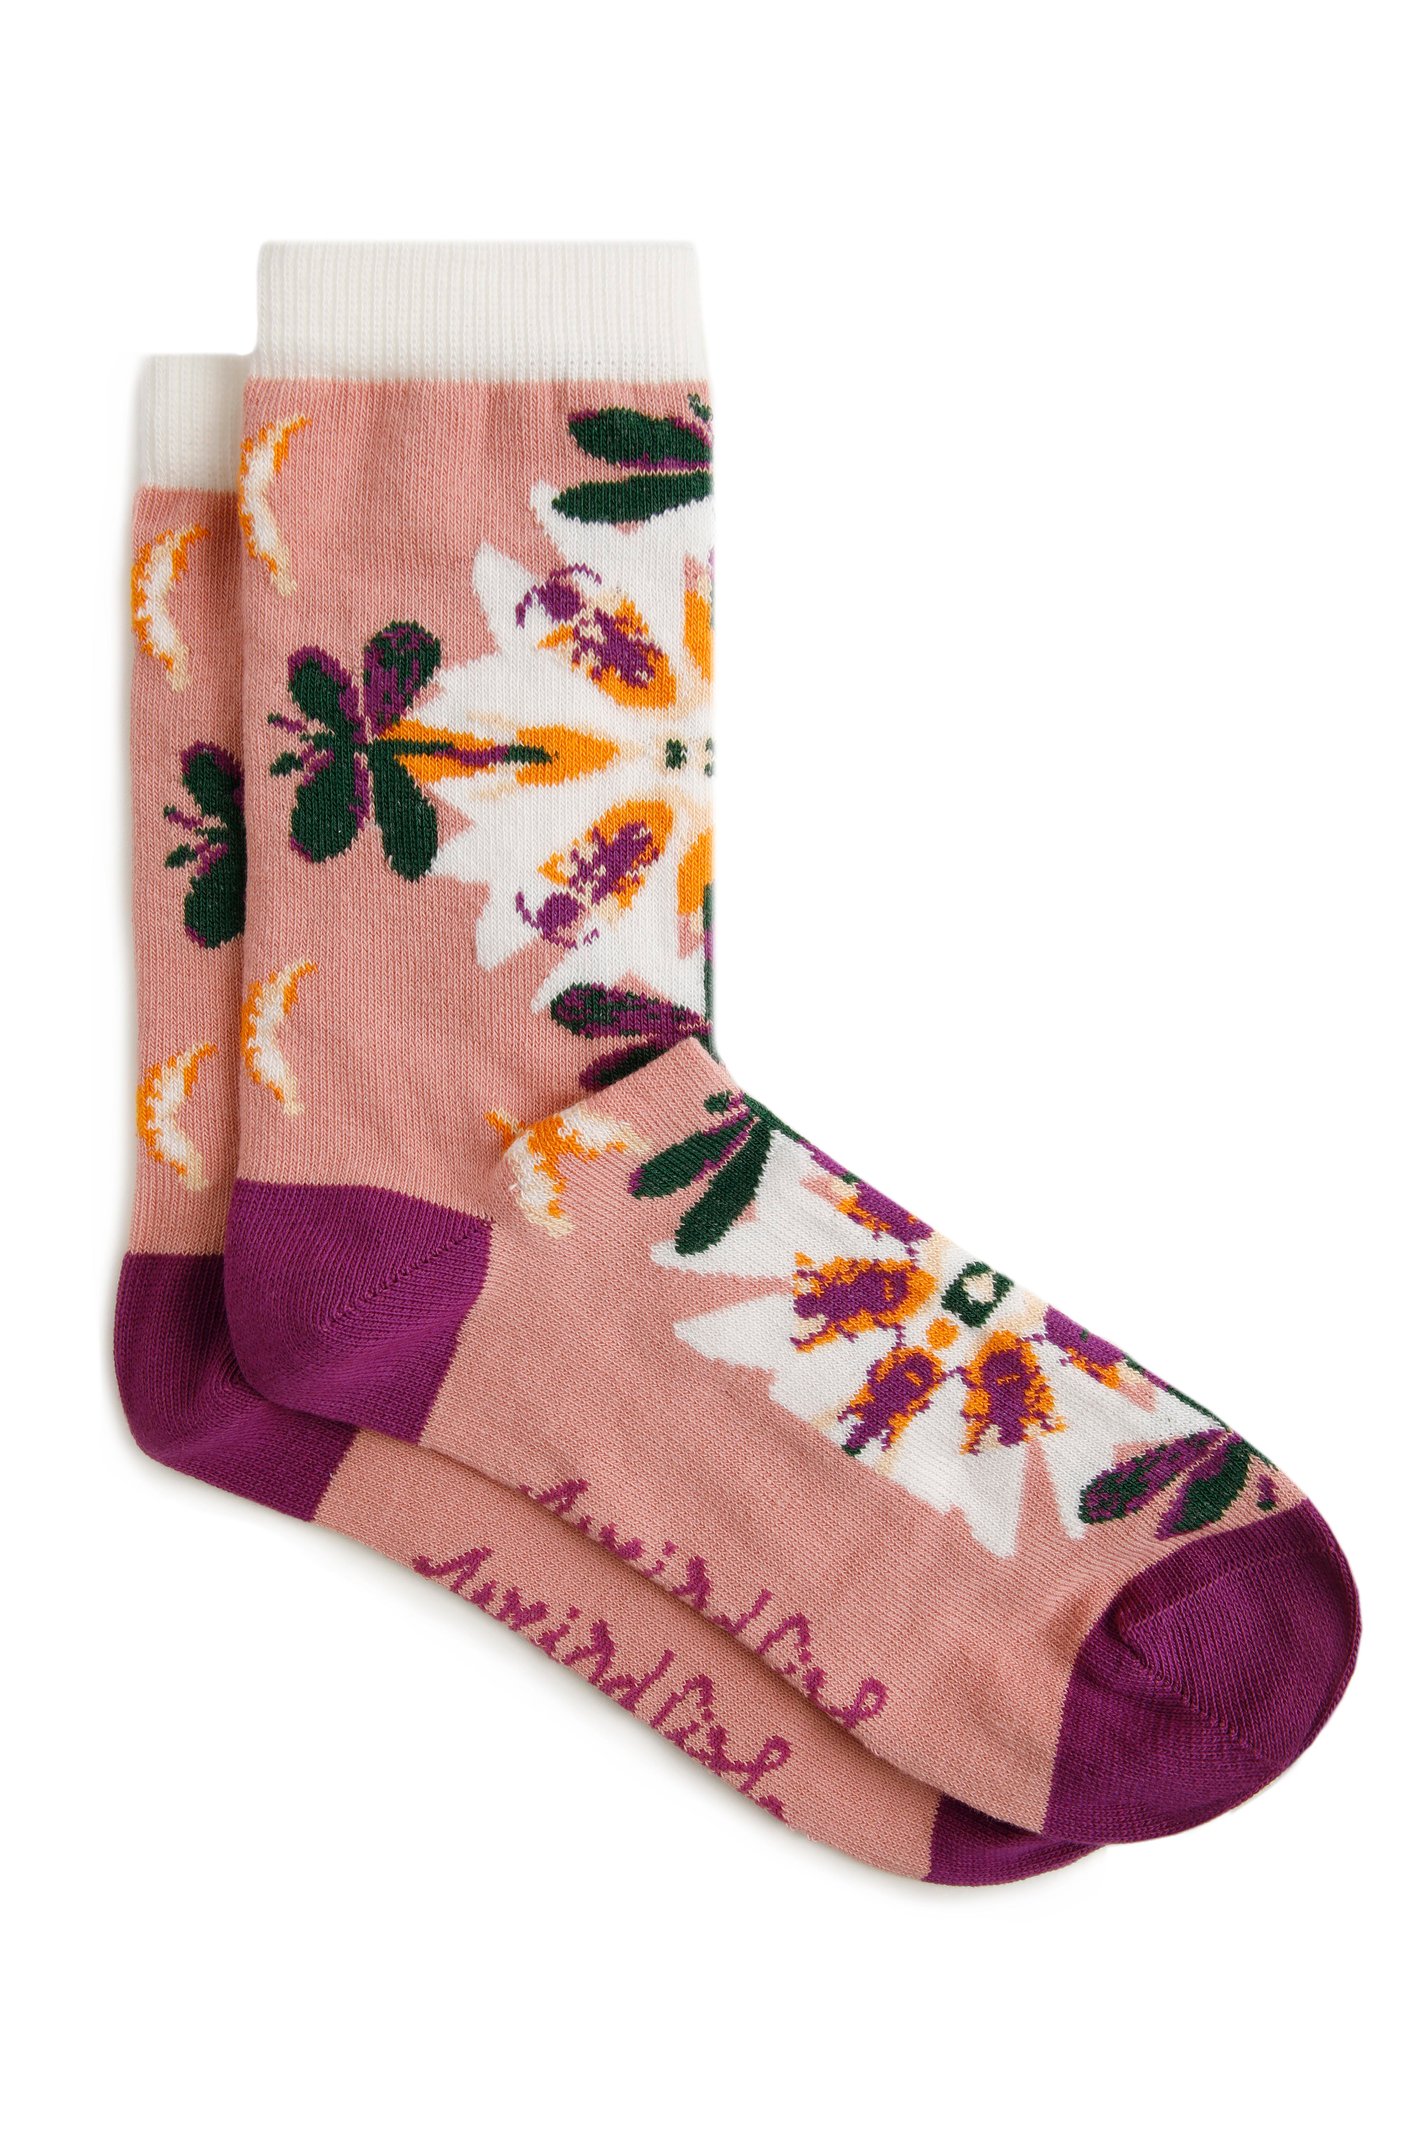 Weird Fish Ives Patterned Jacquard Socks Pale Pink Size 4-7